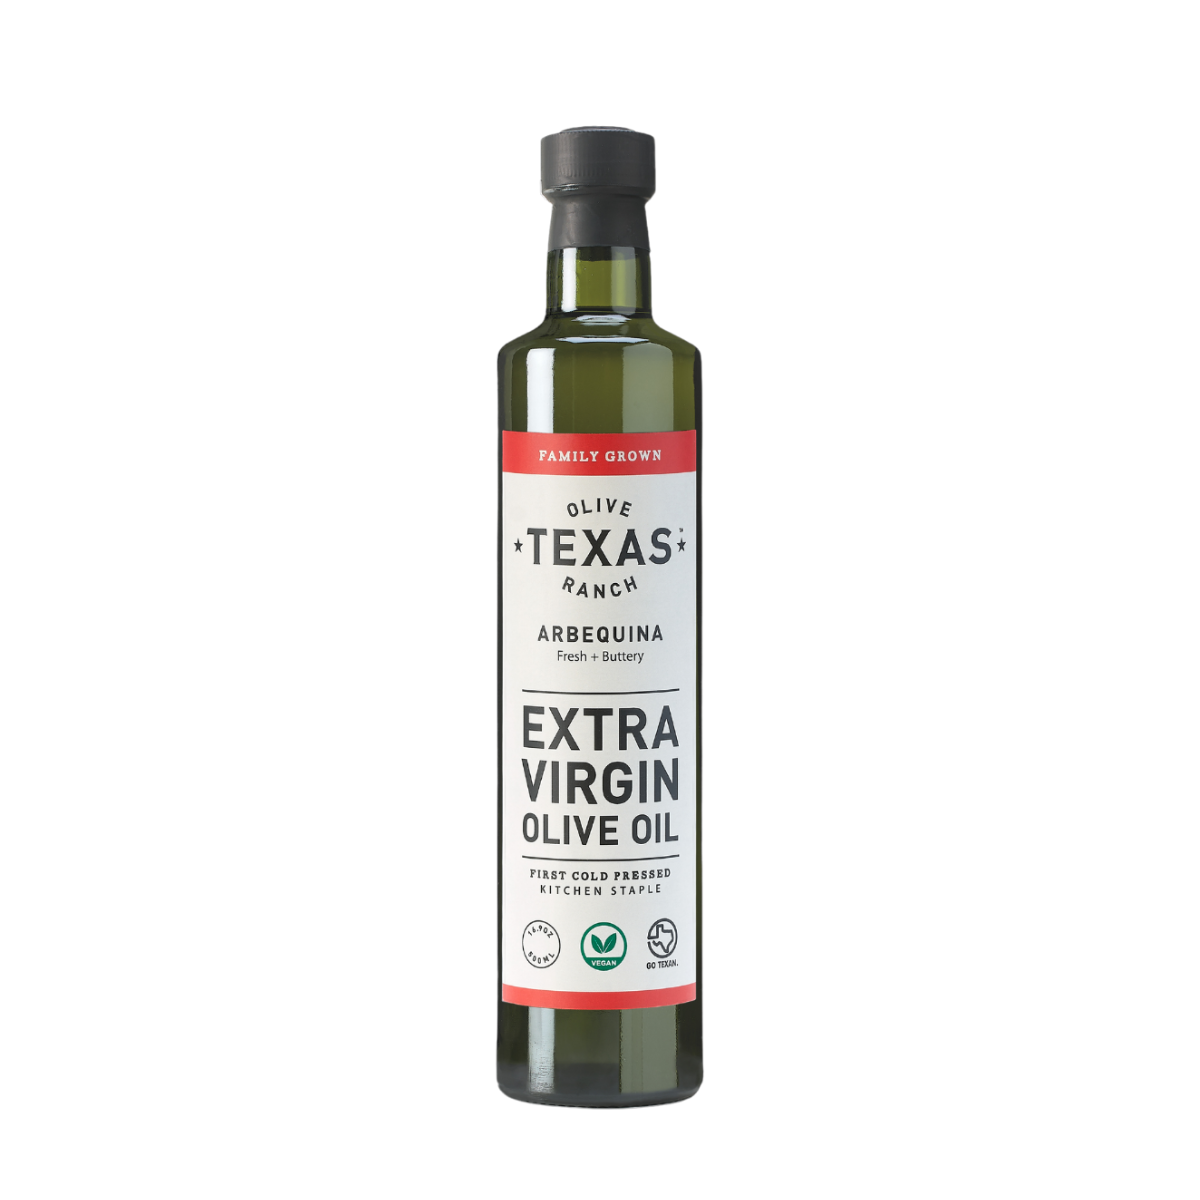 500mLKitchenStapleArbequinaOliveOil-TexasOliveRanch.png